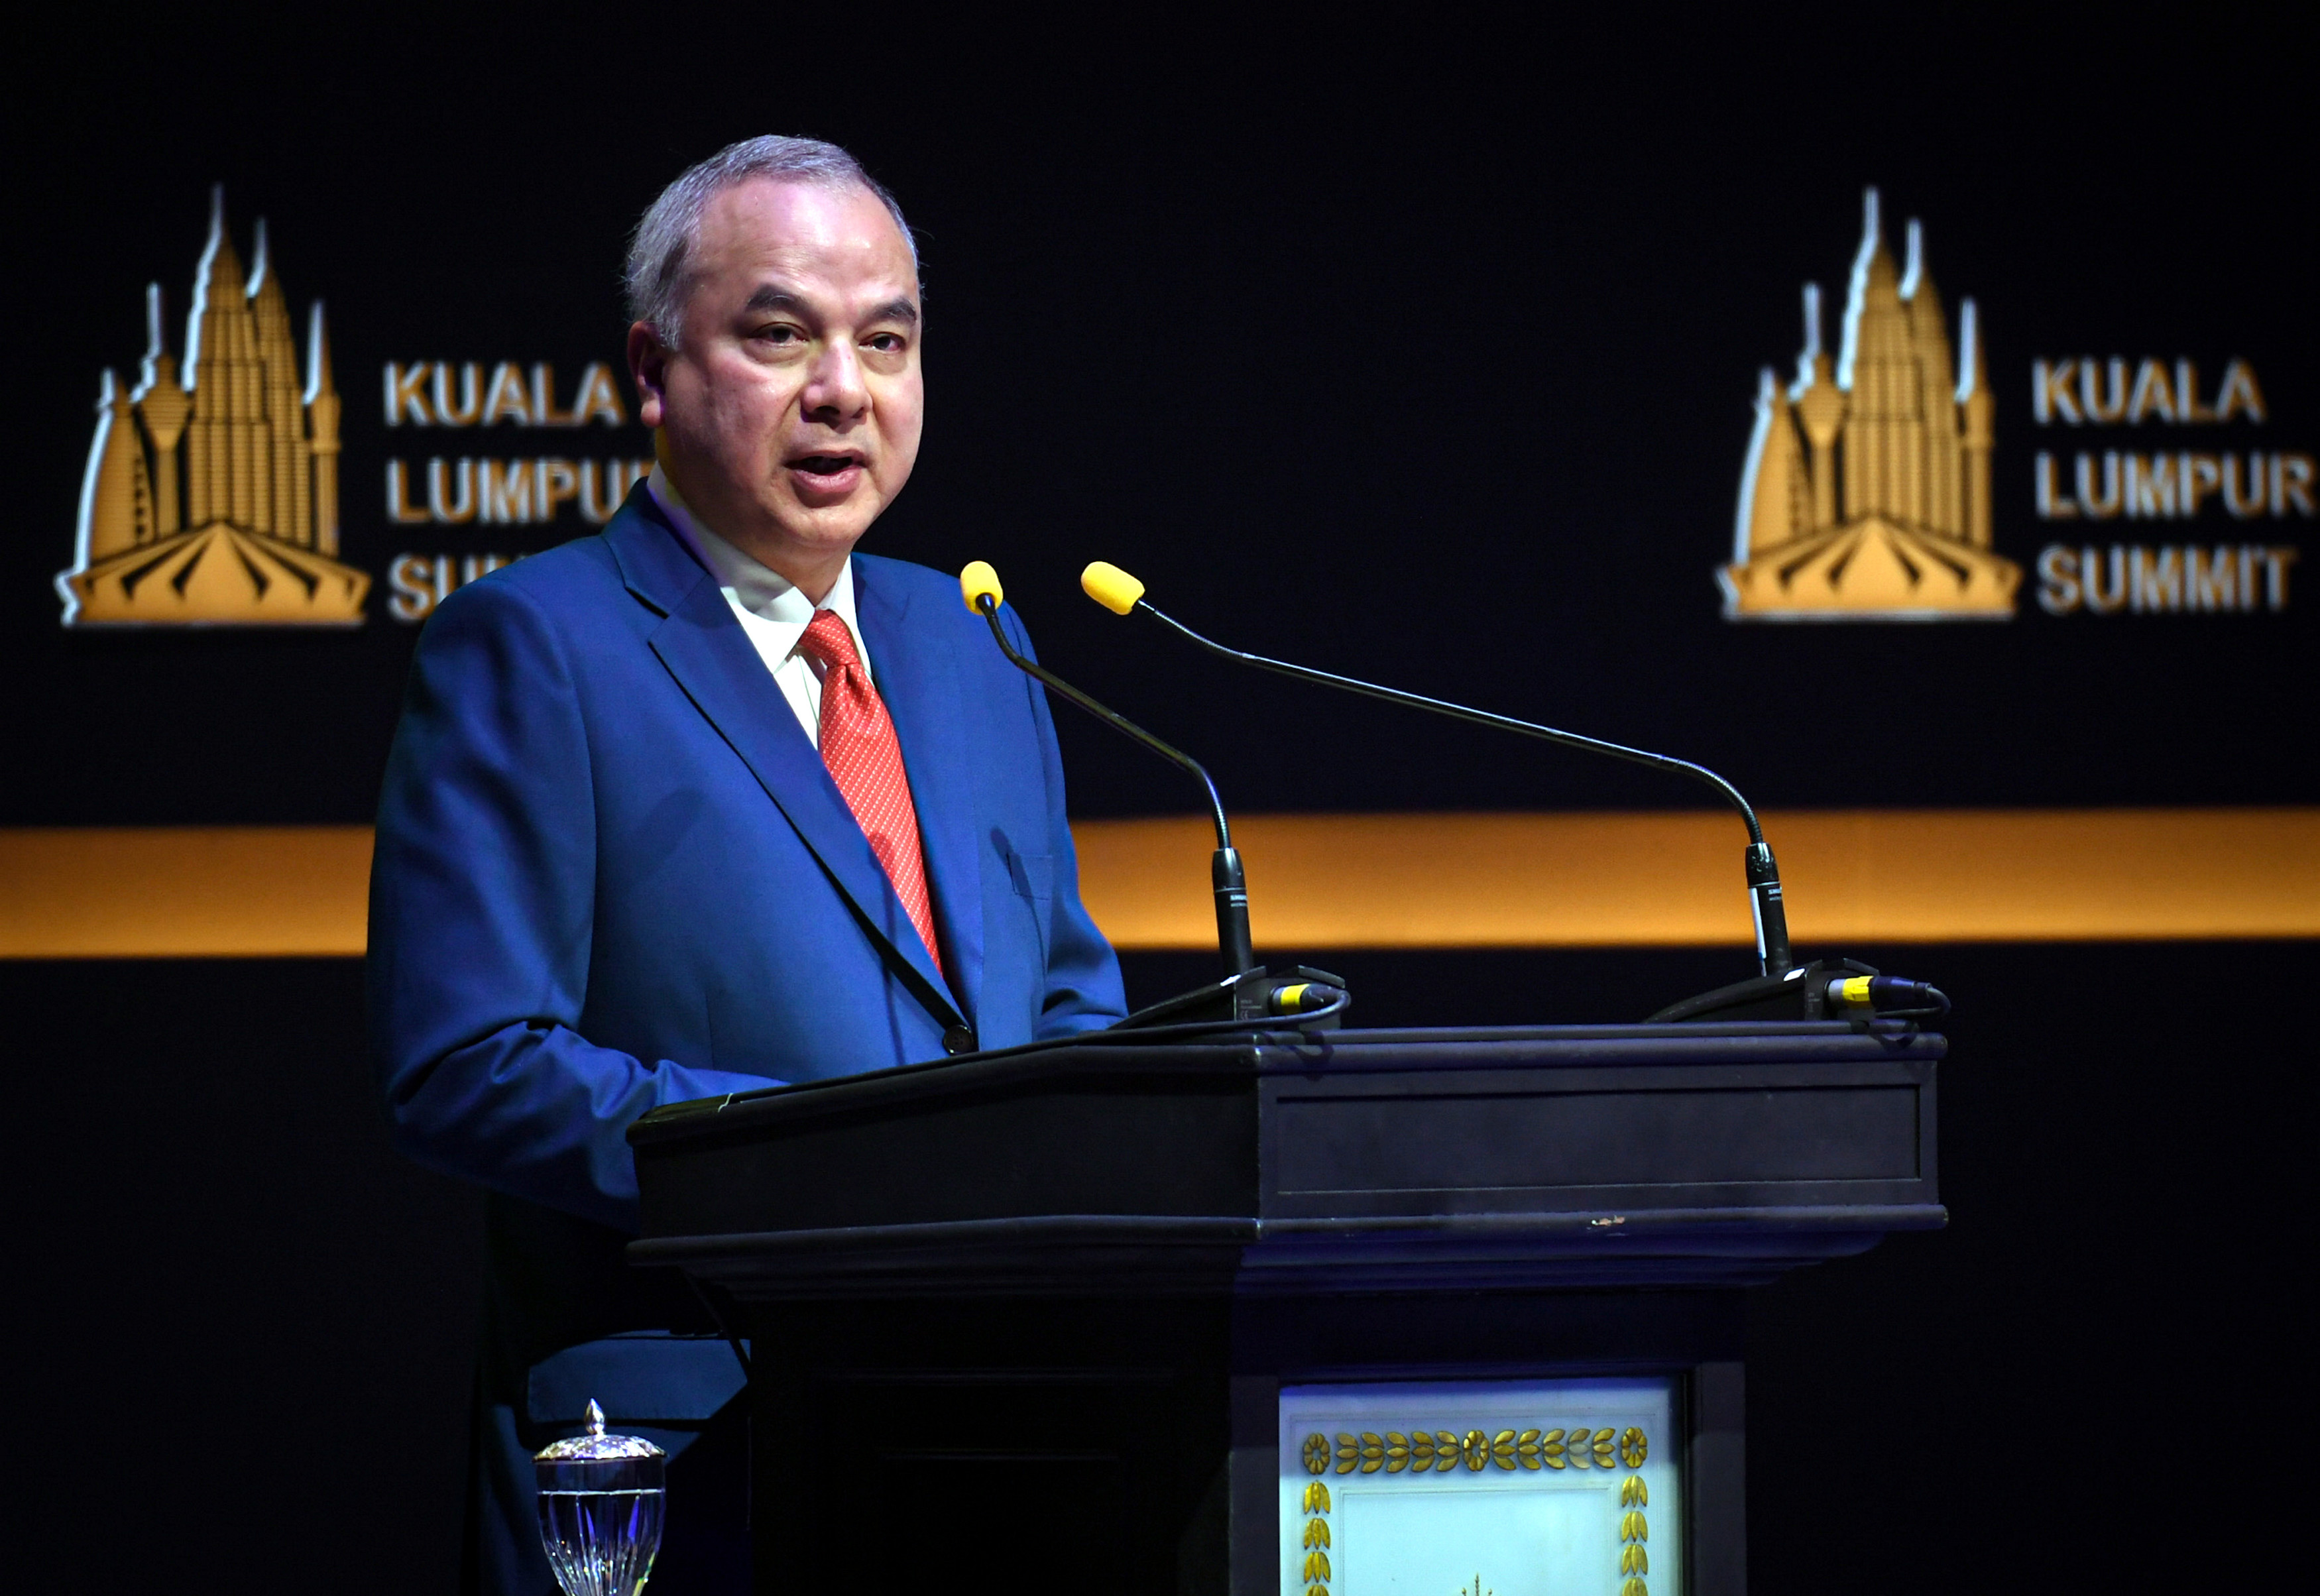 Tackling the plight of nationless Muslims must be a priority, says Malaysia’s Sultan Nazrin